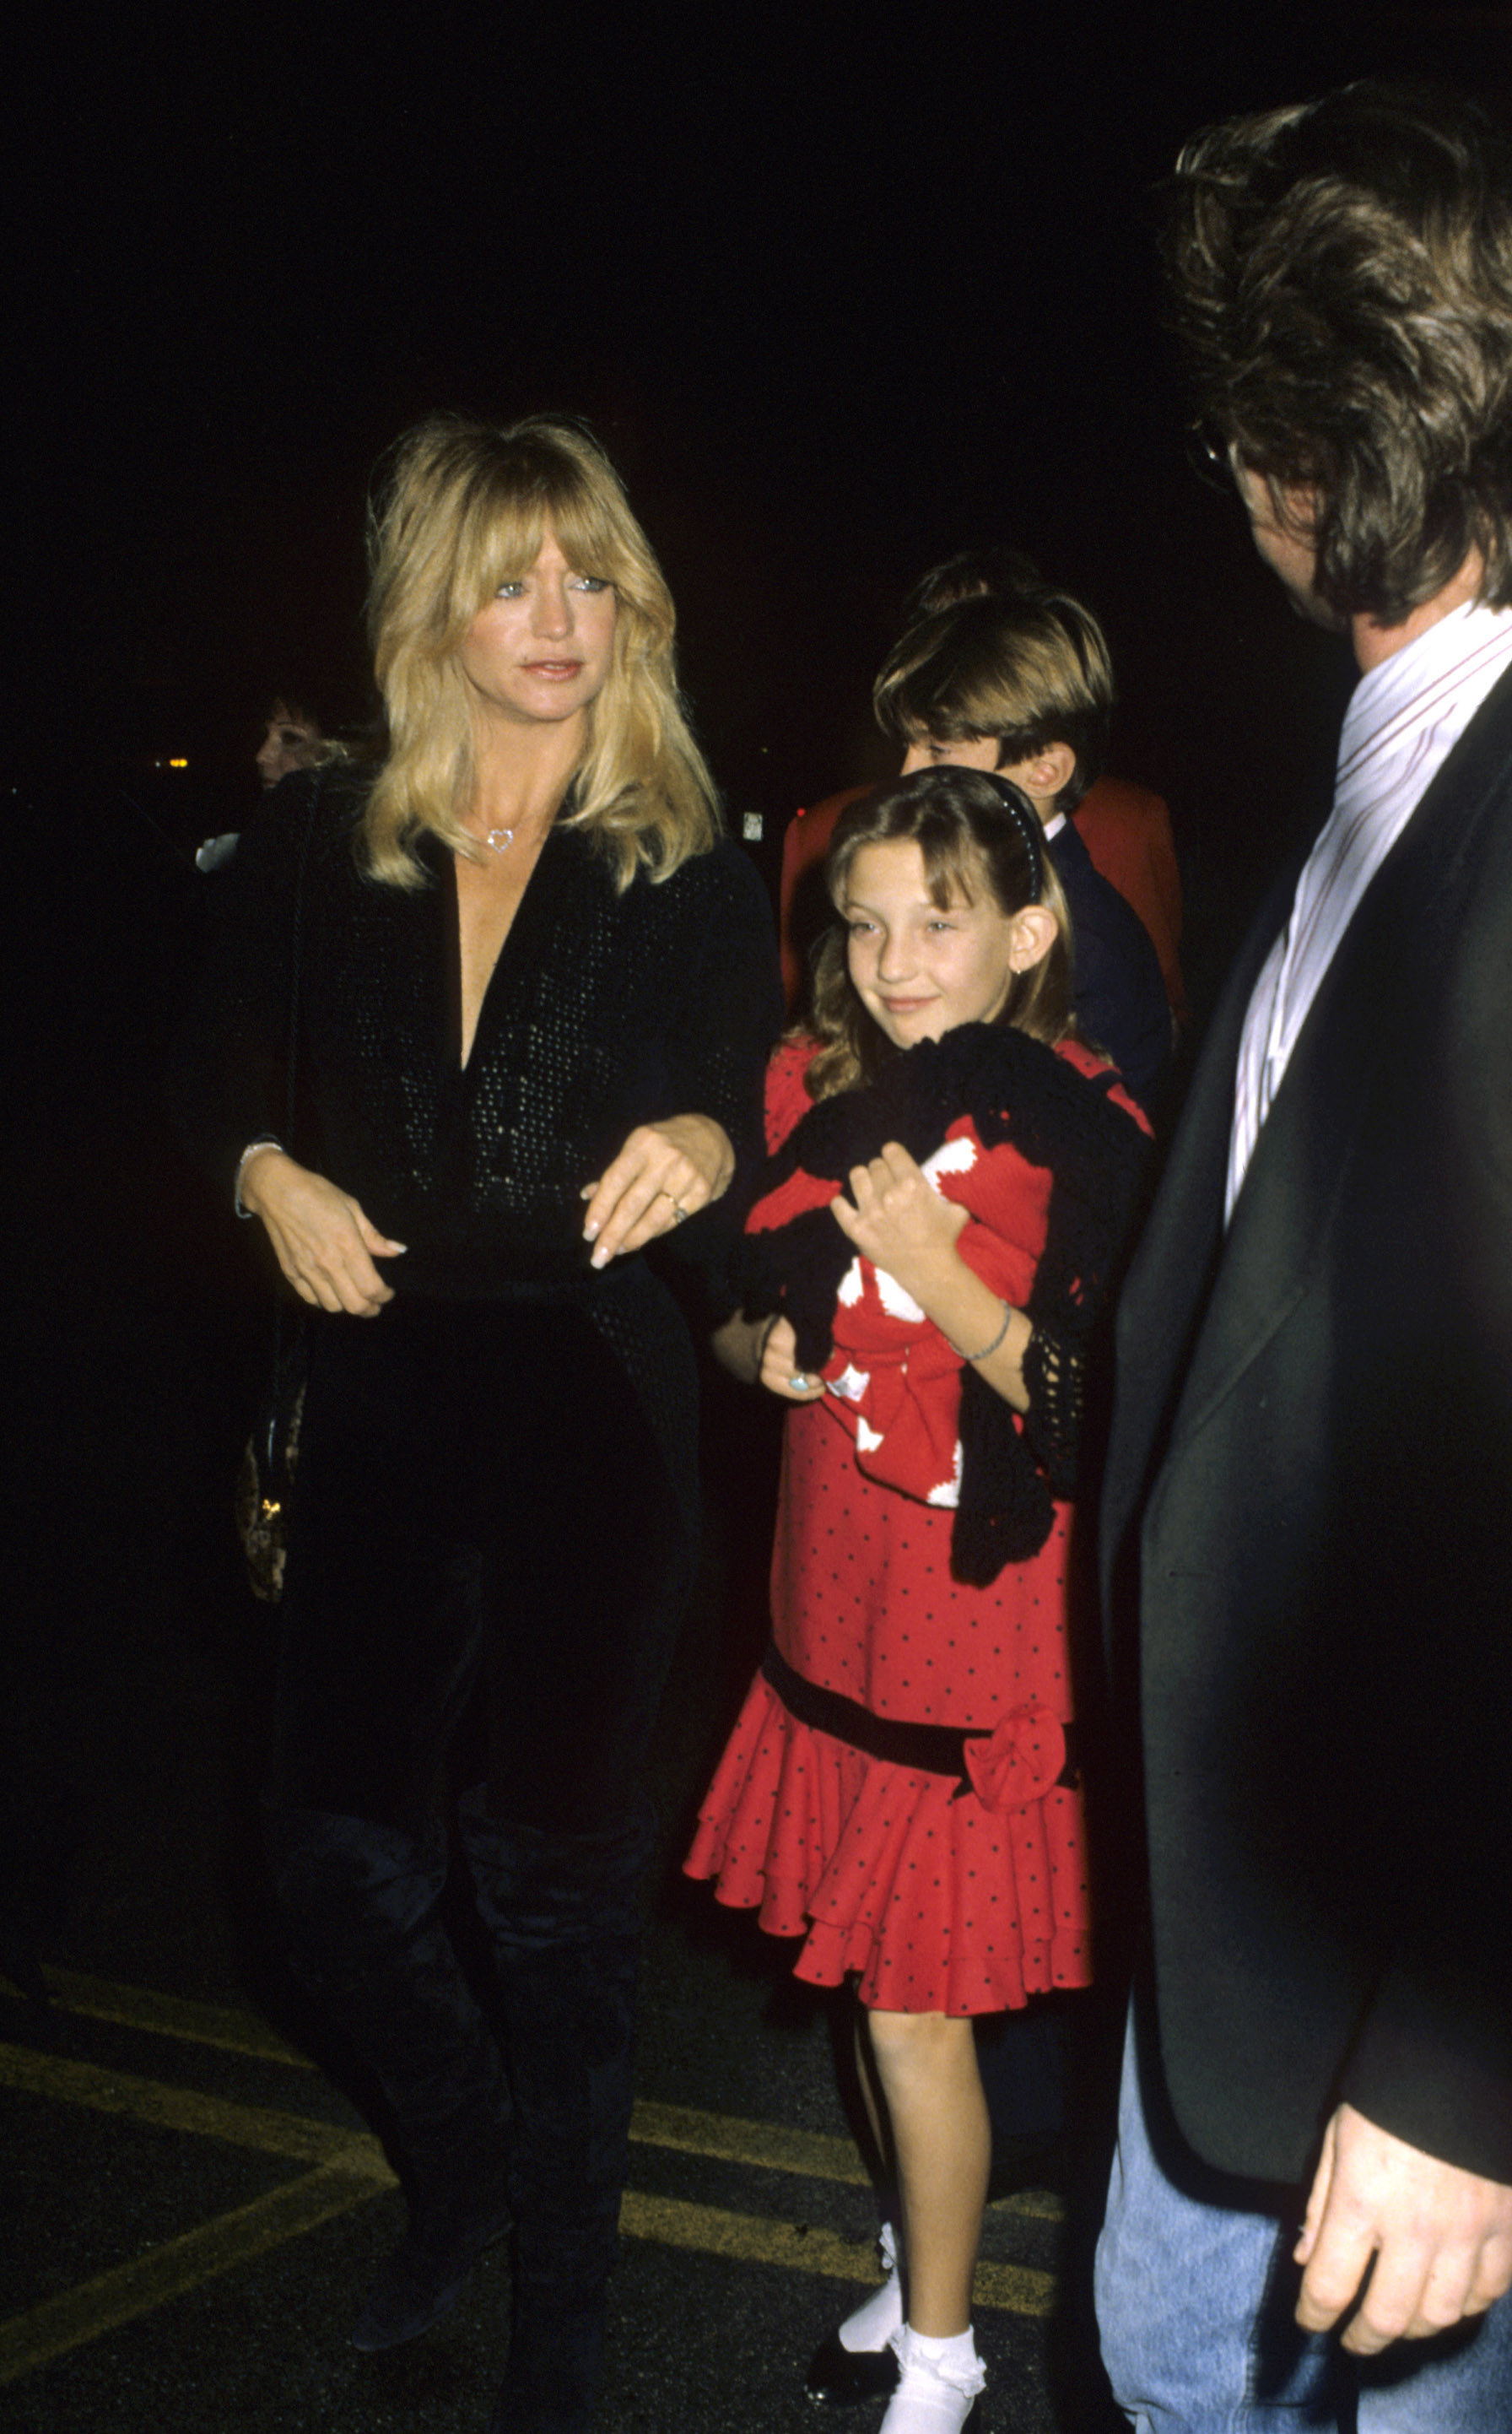 Hawn, Hudson, and Kurt Russell at the Hollywood Palladium in 1989